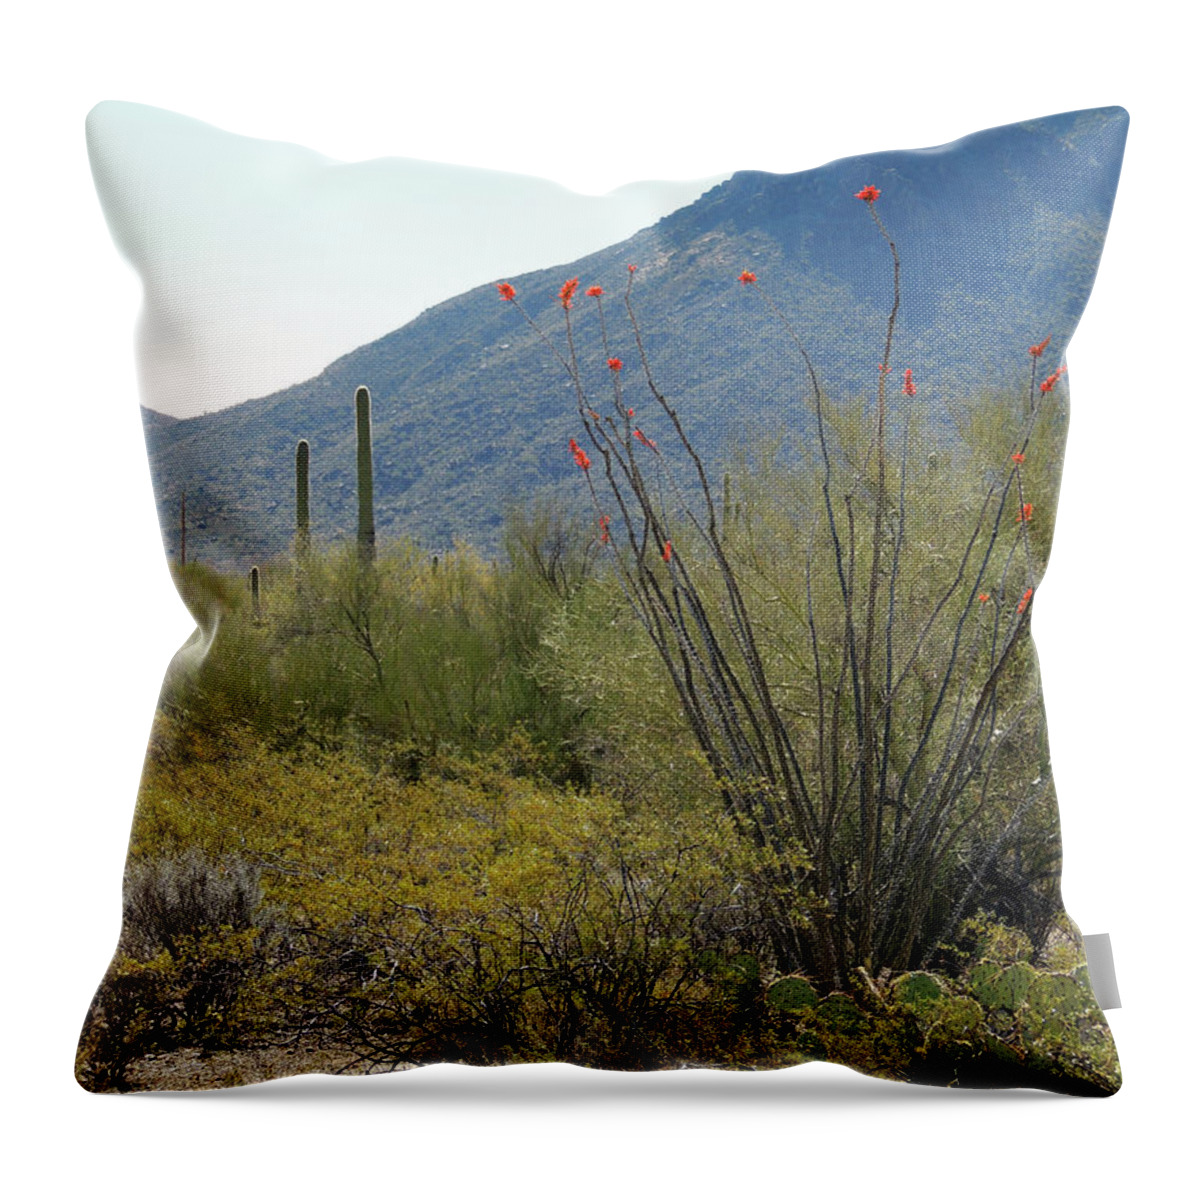 Blooming Throw Pillow featuring the photograph Blooming Ocotillo by Gordon Beck